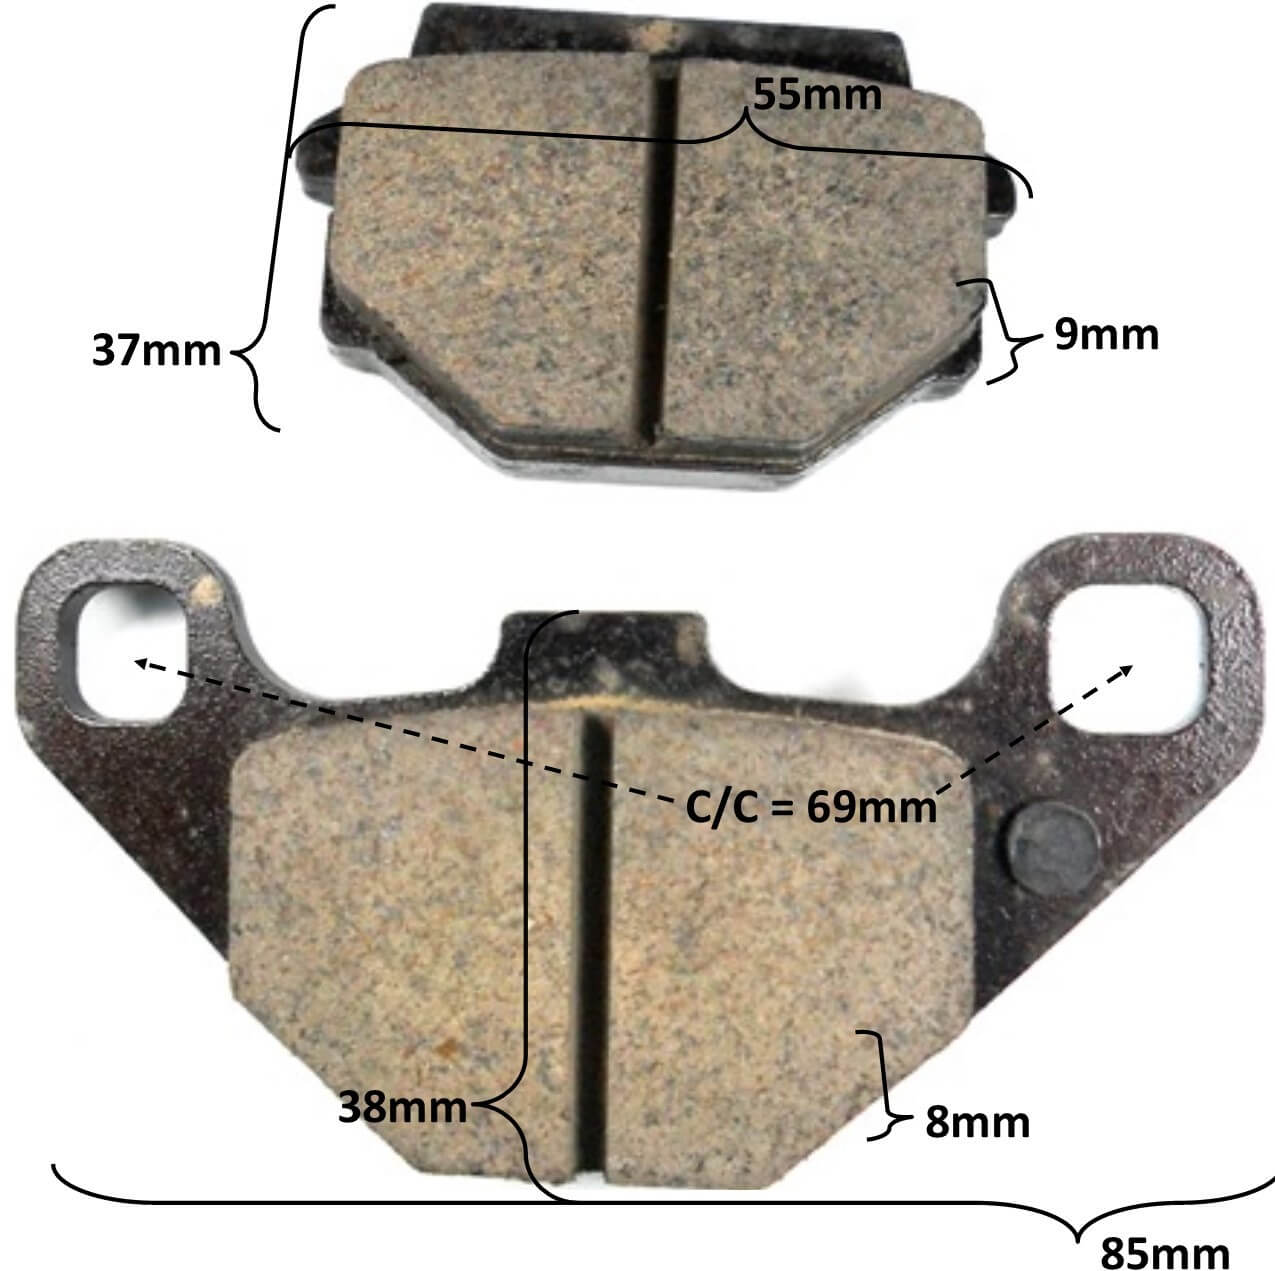 Disc Brake Pads Heavy Duty With Locator Pin on Rear Fits E-Ton Viper RXL70, RXL90R, RXL150R, Vector 250 ATVs + E-Ton Matrix 50, 150cc Scooters + More